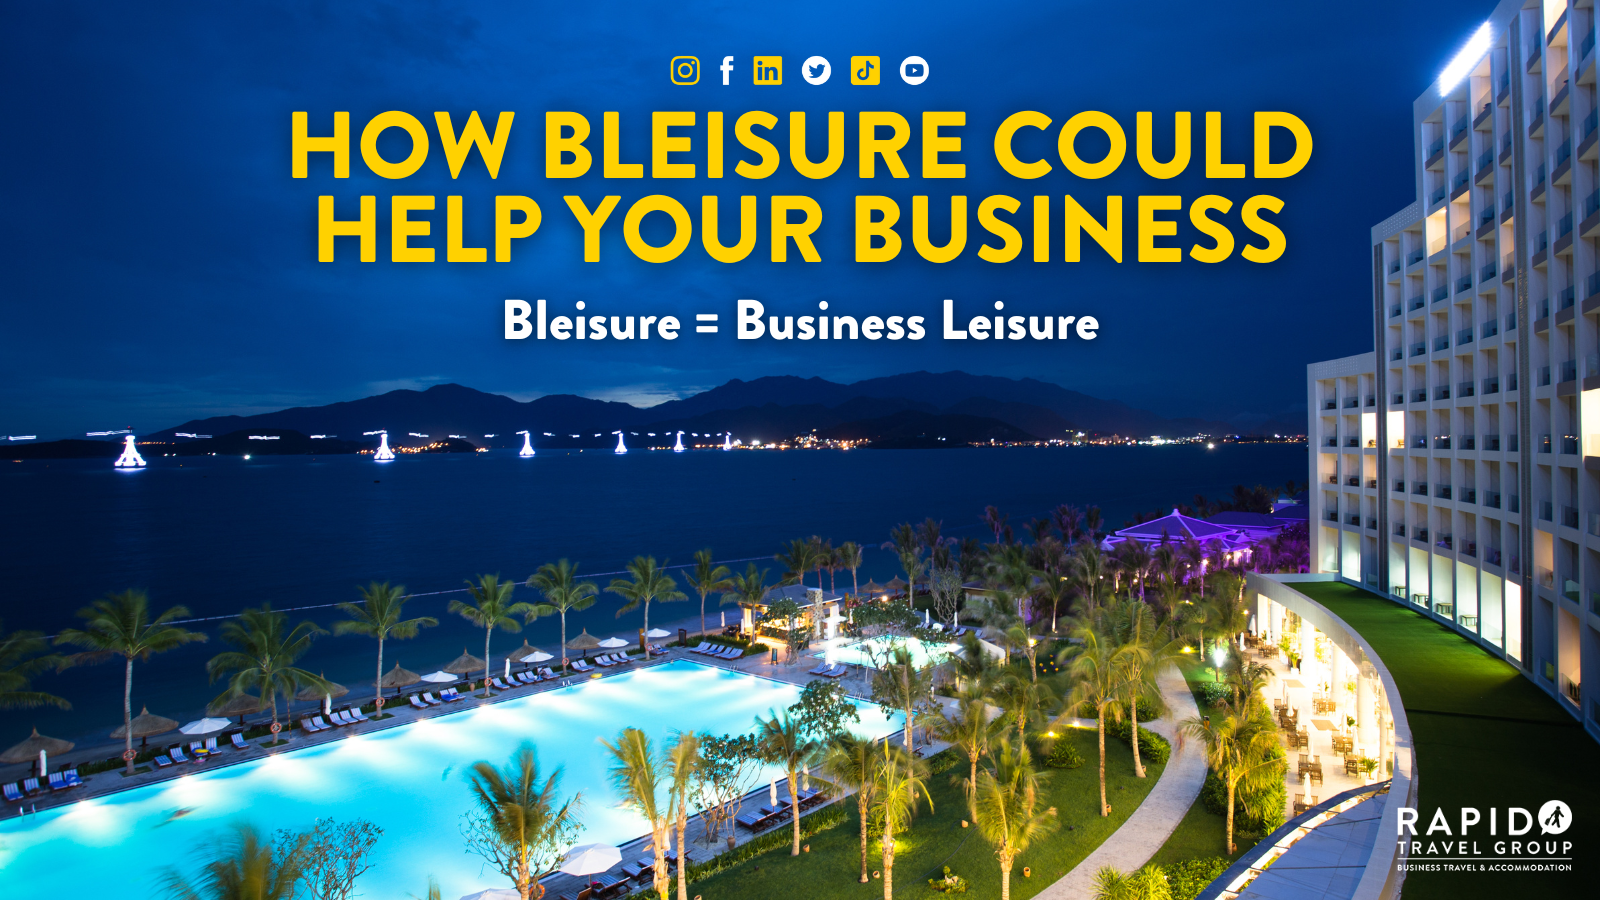 How Bleisure could help your business. Blesiure = business leisure